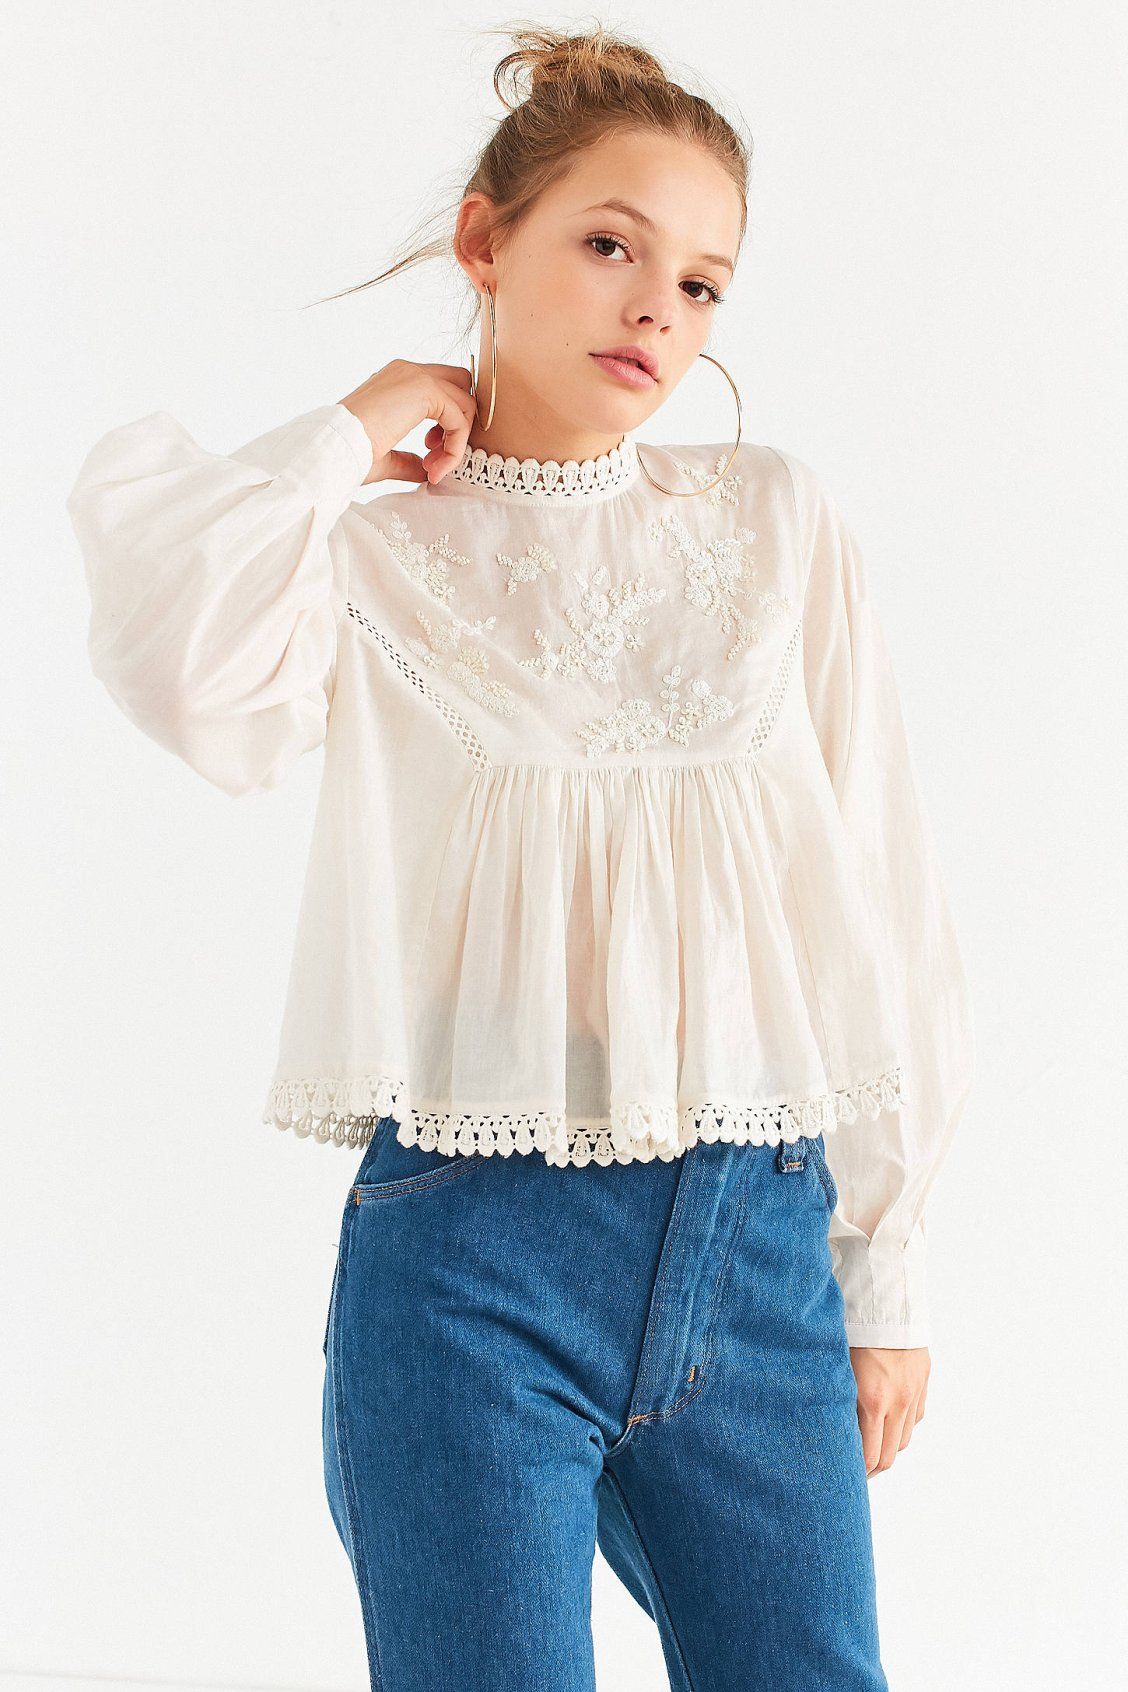 Urbanoutfitter Blouses to Enhance Your Beauty